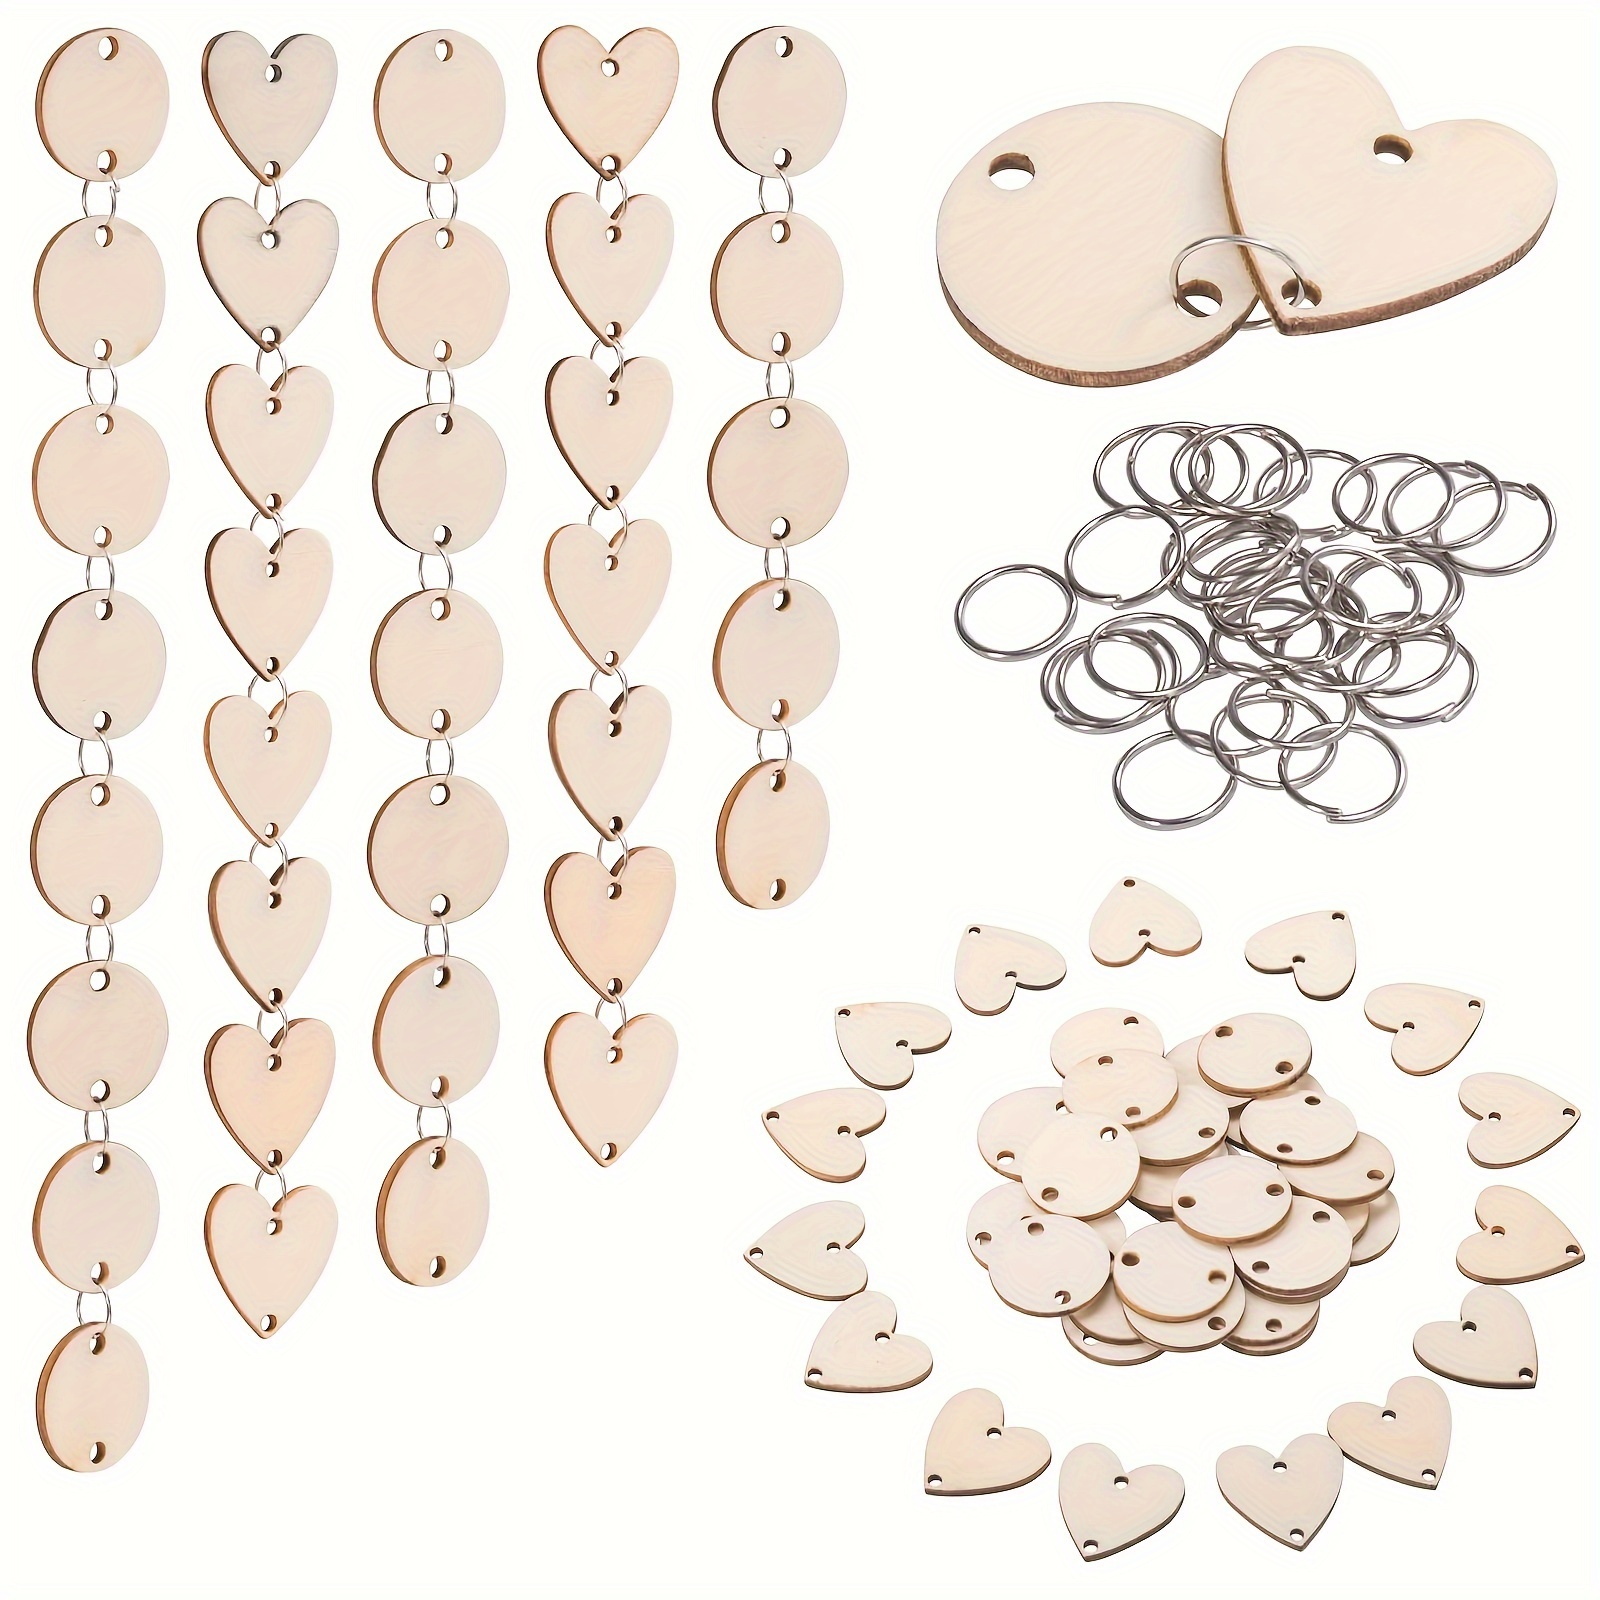  100Pcs 1 Wooden Hearts for Crafts, Small Wood Hearts